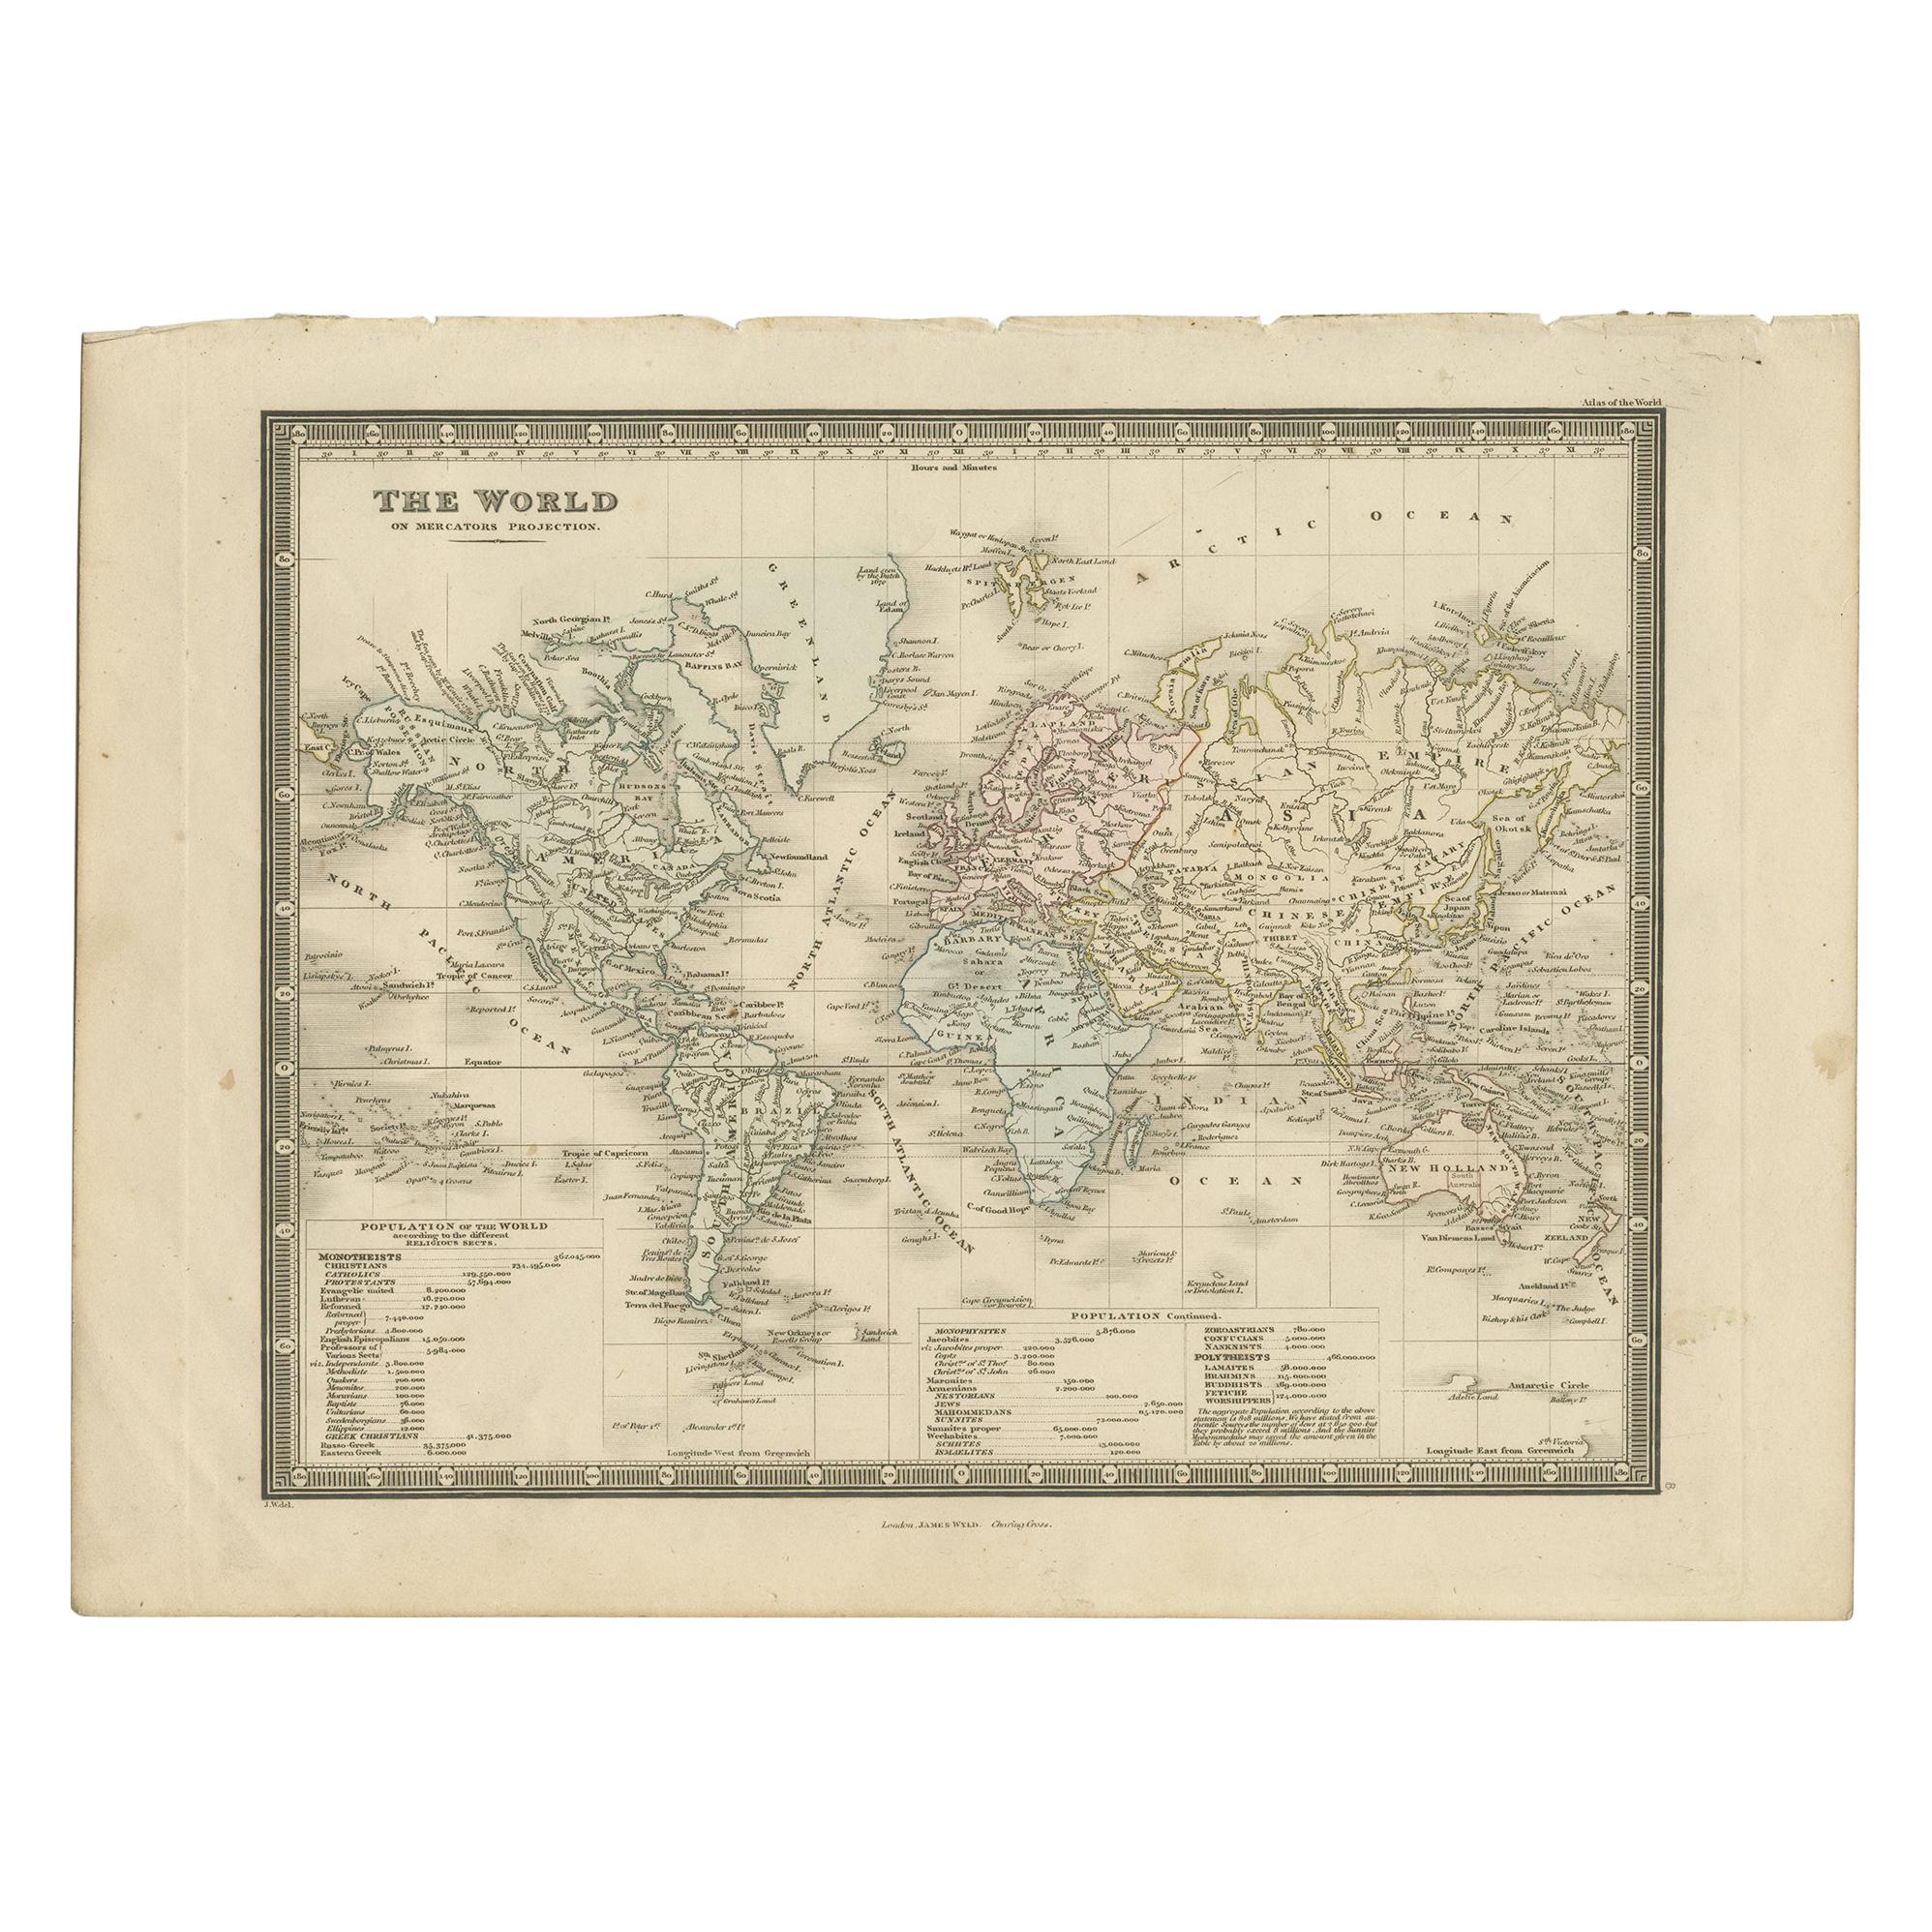 Antique Map of the World, Mercator Projection, by Wyld, '1845'